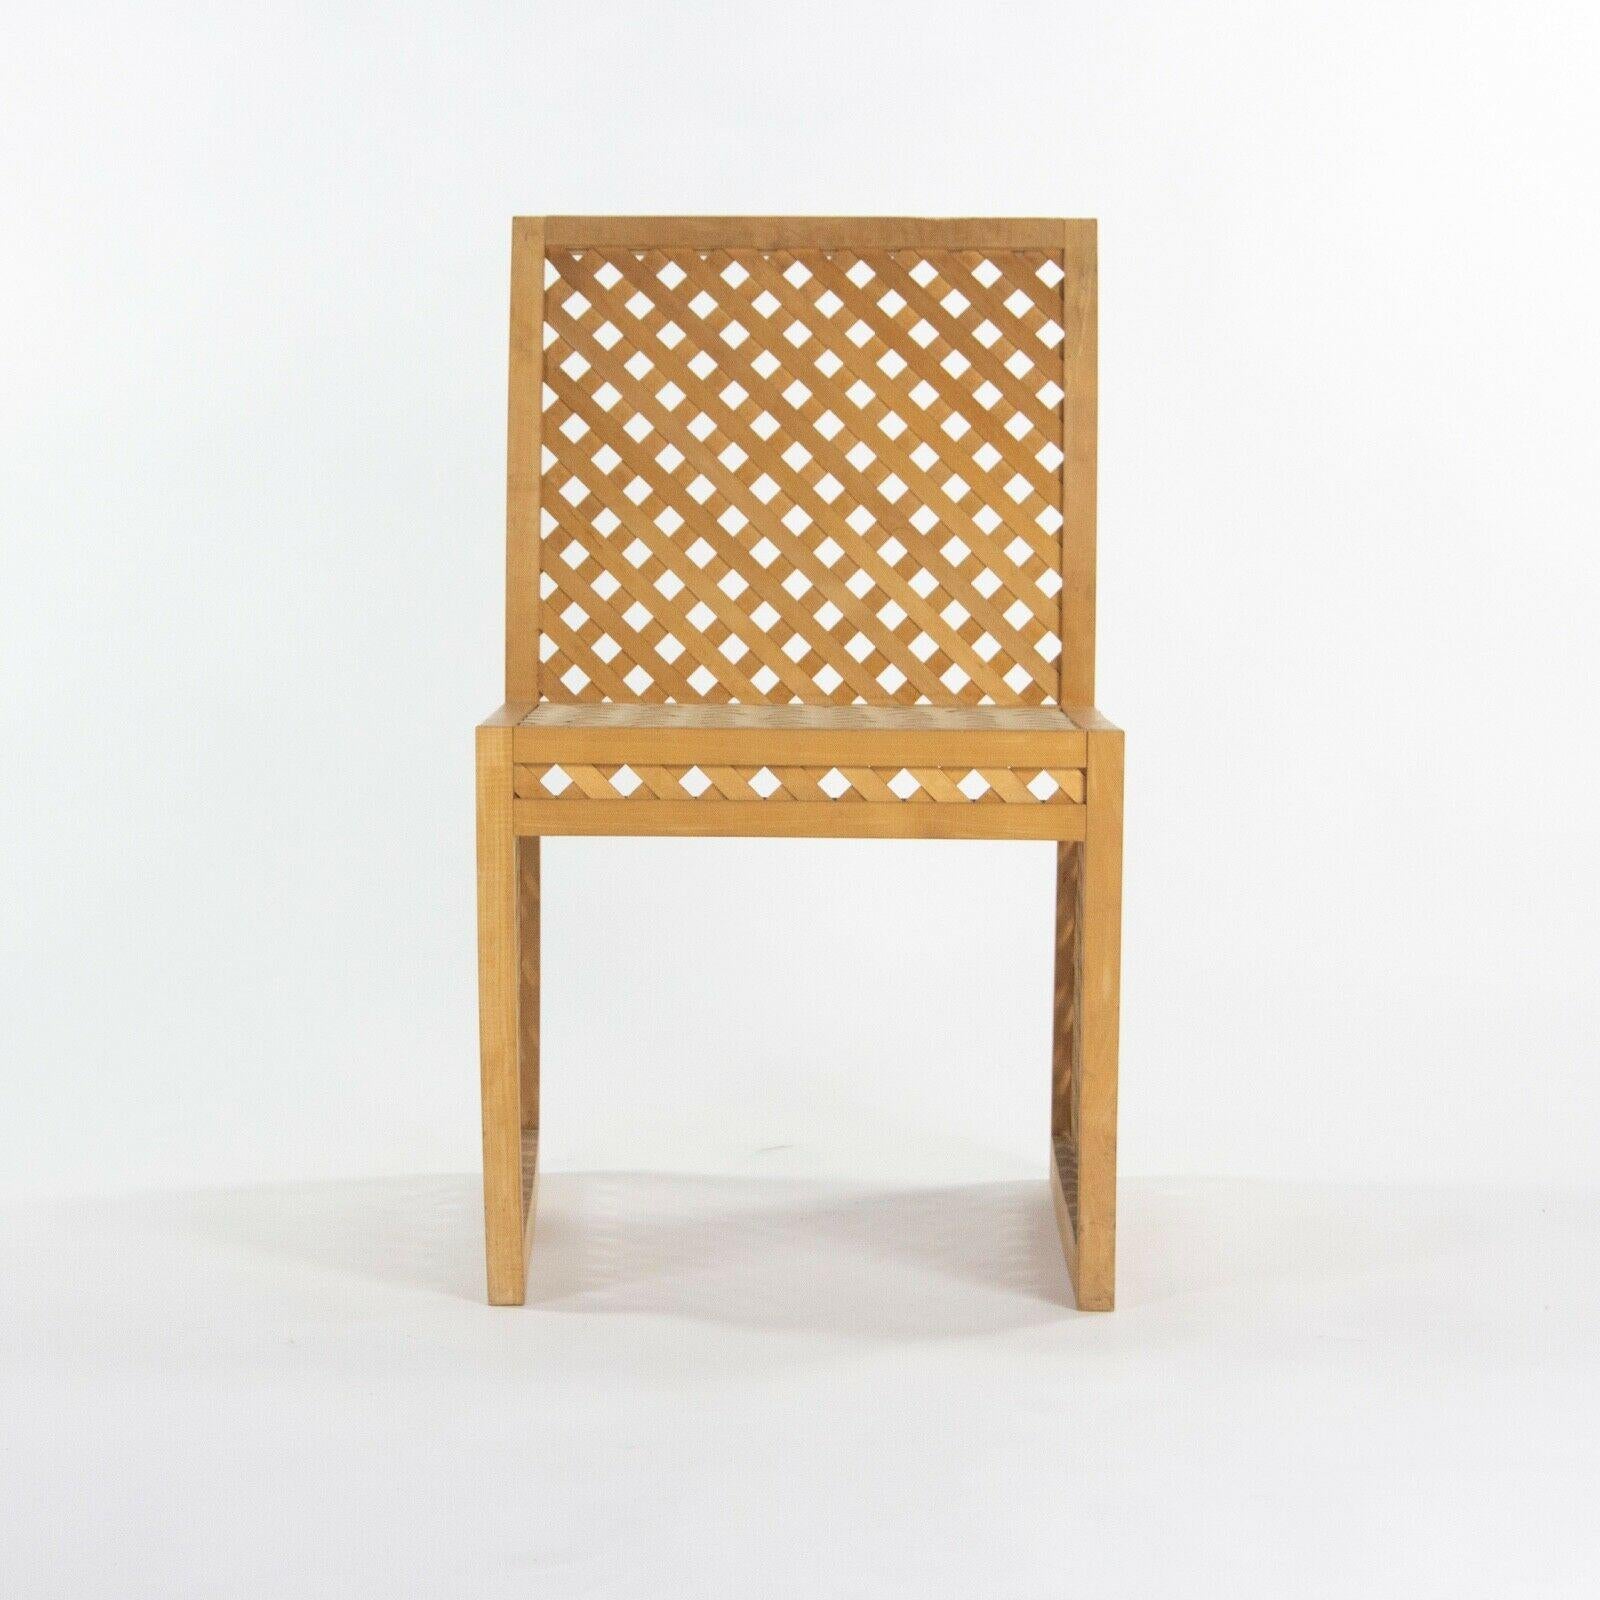 1985 Prototype Richard Schultz Wooden Outdoor Collection Dining Chair 2